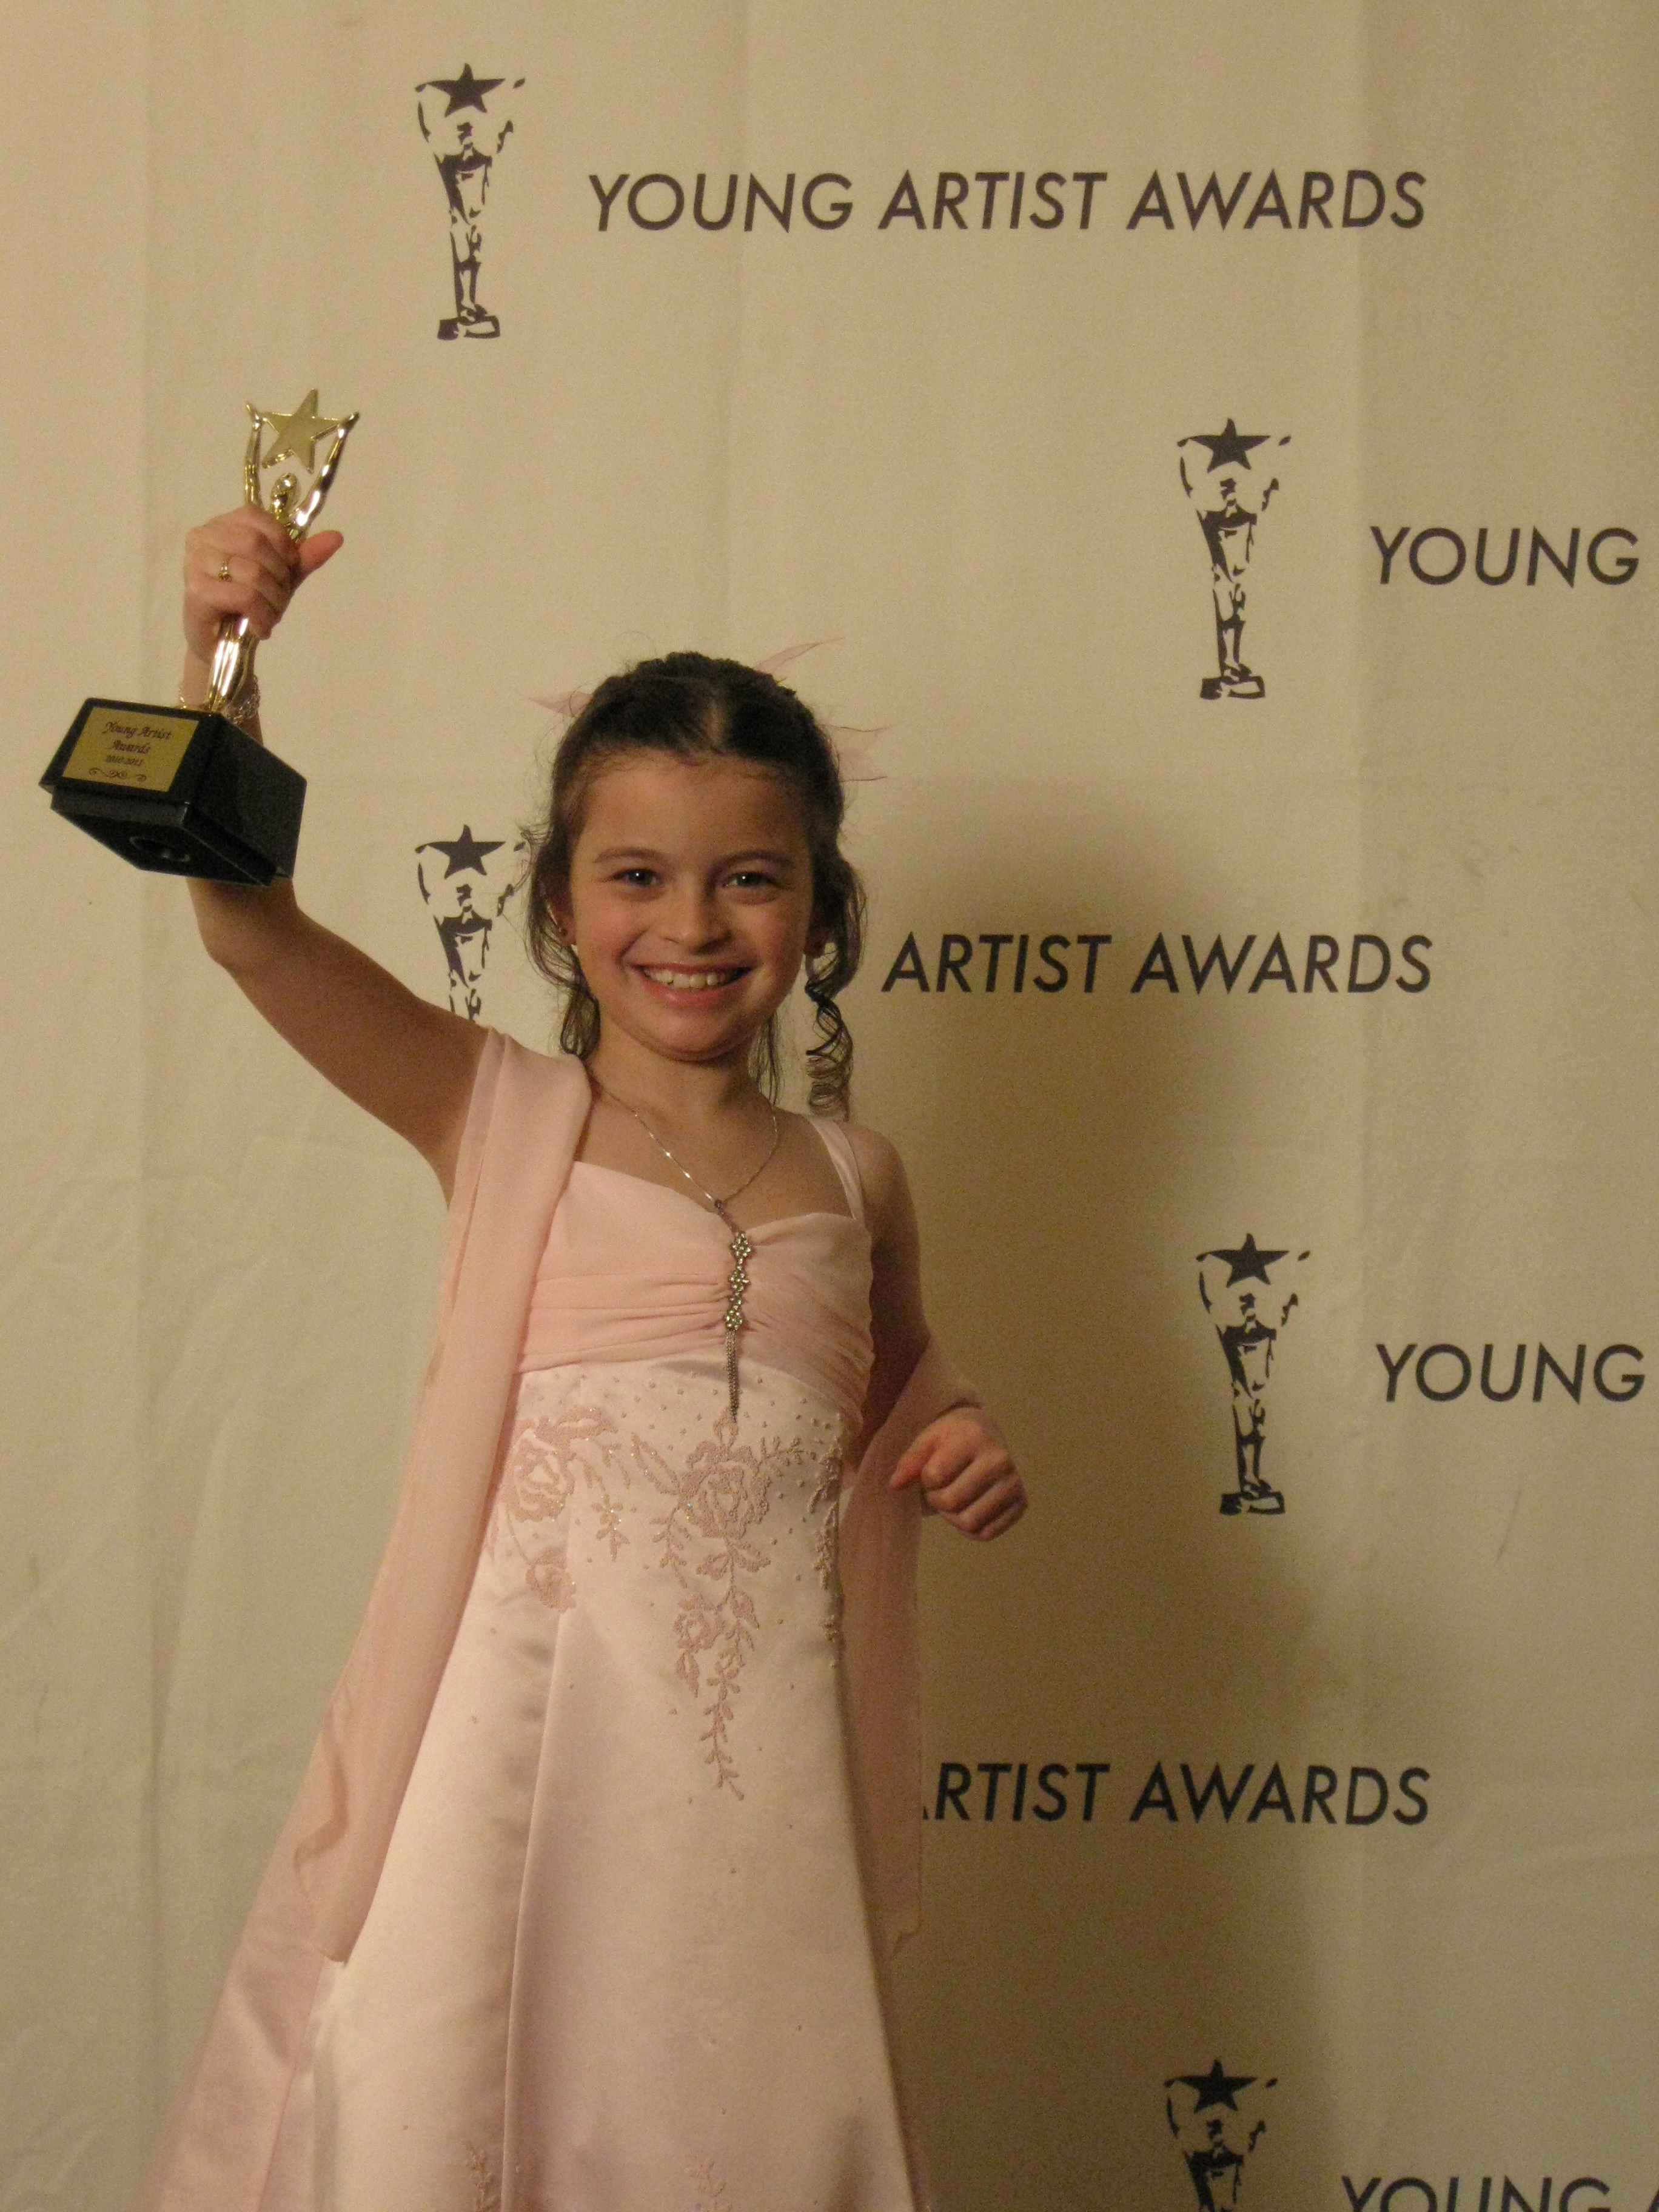 Dalila Bela Winner at the 32nd Young Artists Award (2011) in L.A. for 